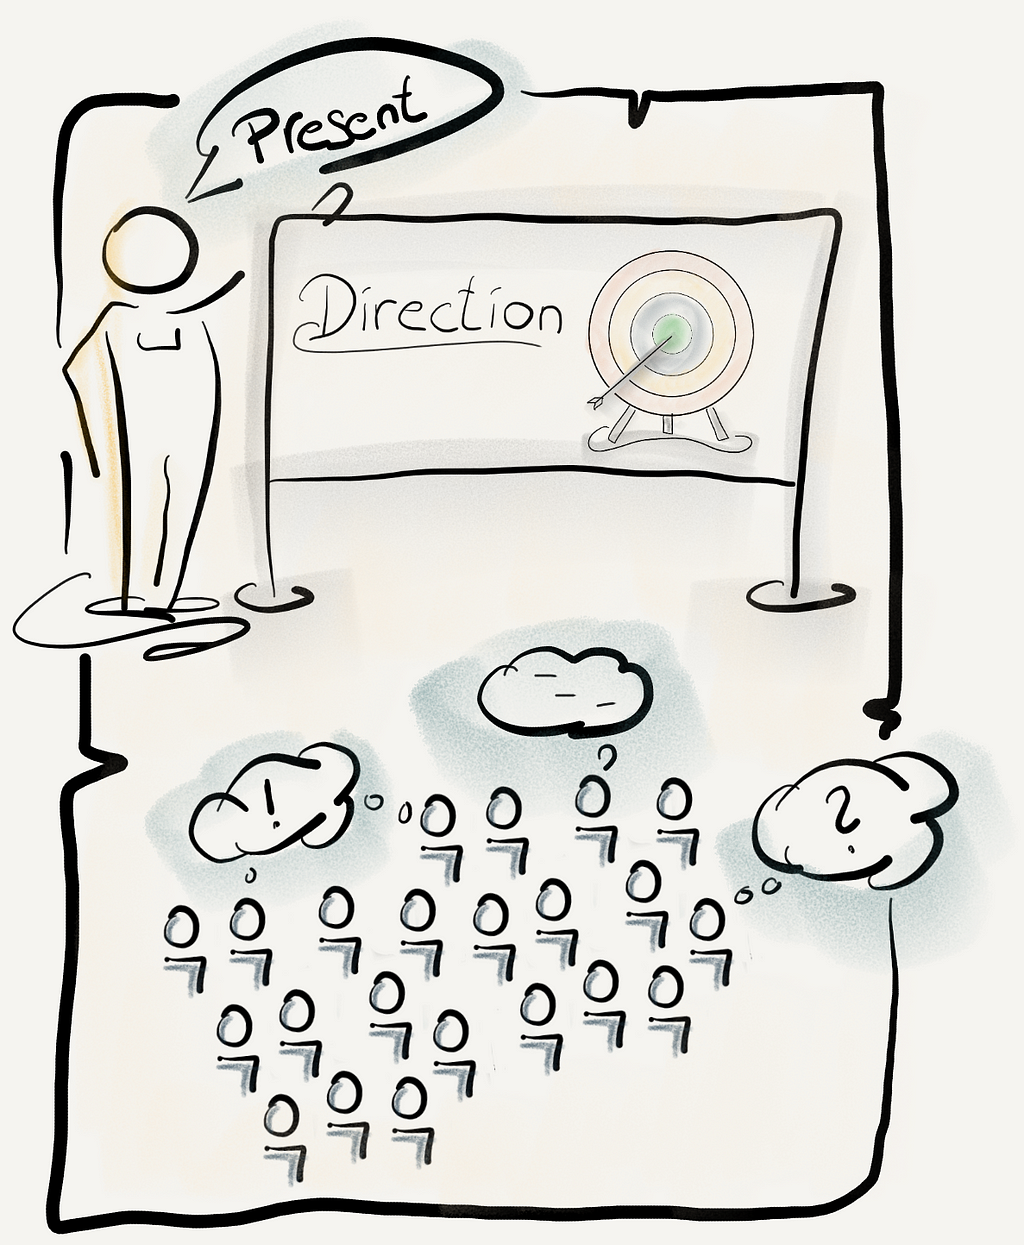 Share your direction — people listen at this stage